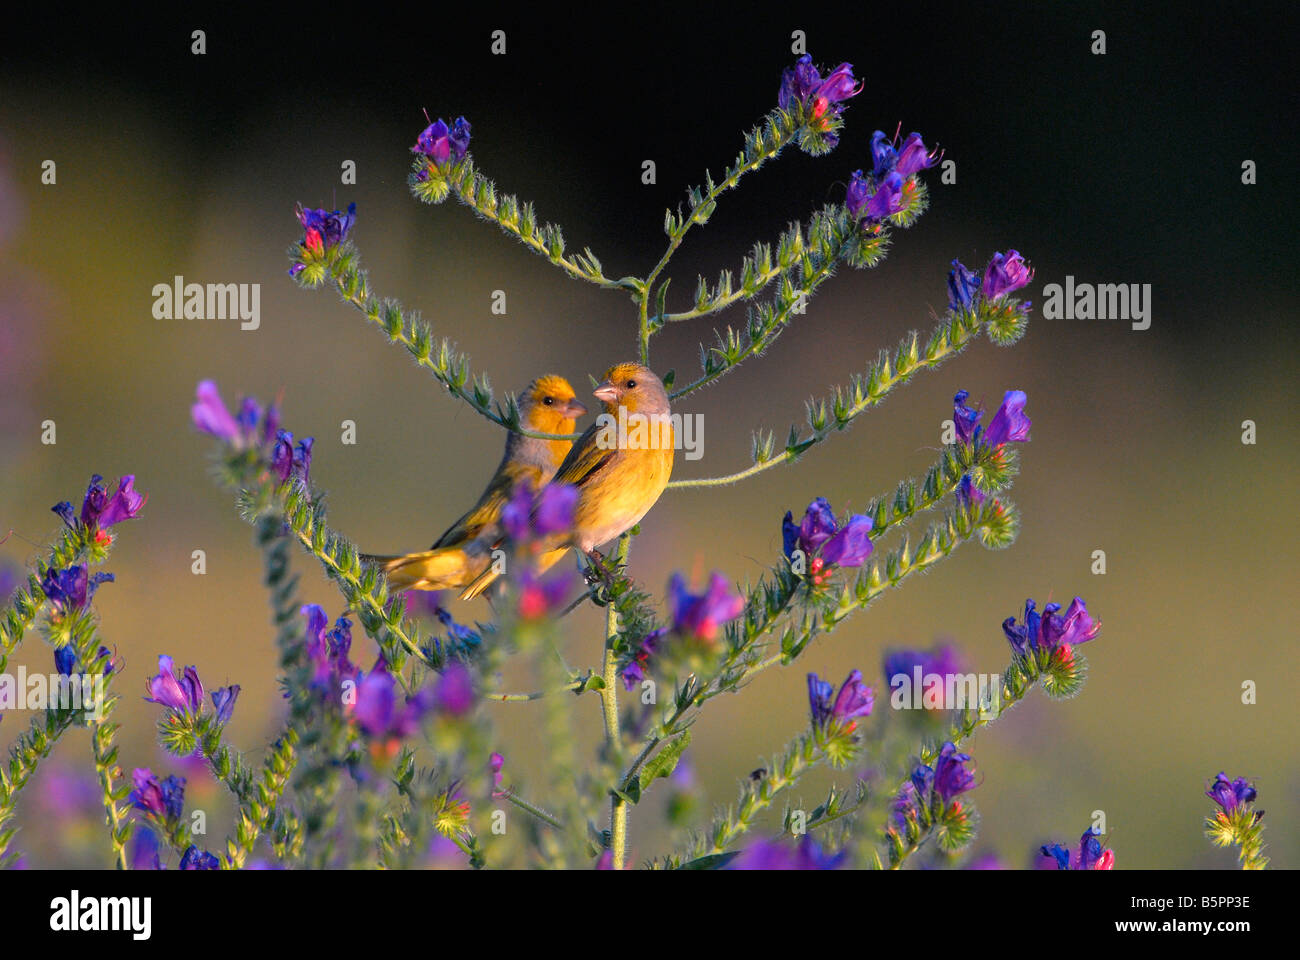 Male Cape canaries sitting in bright purple weeds, Cape Town, Western Cape, South Africa Stock Photo